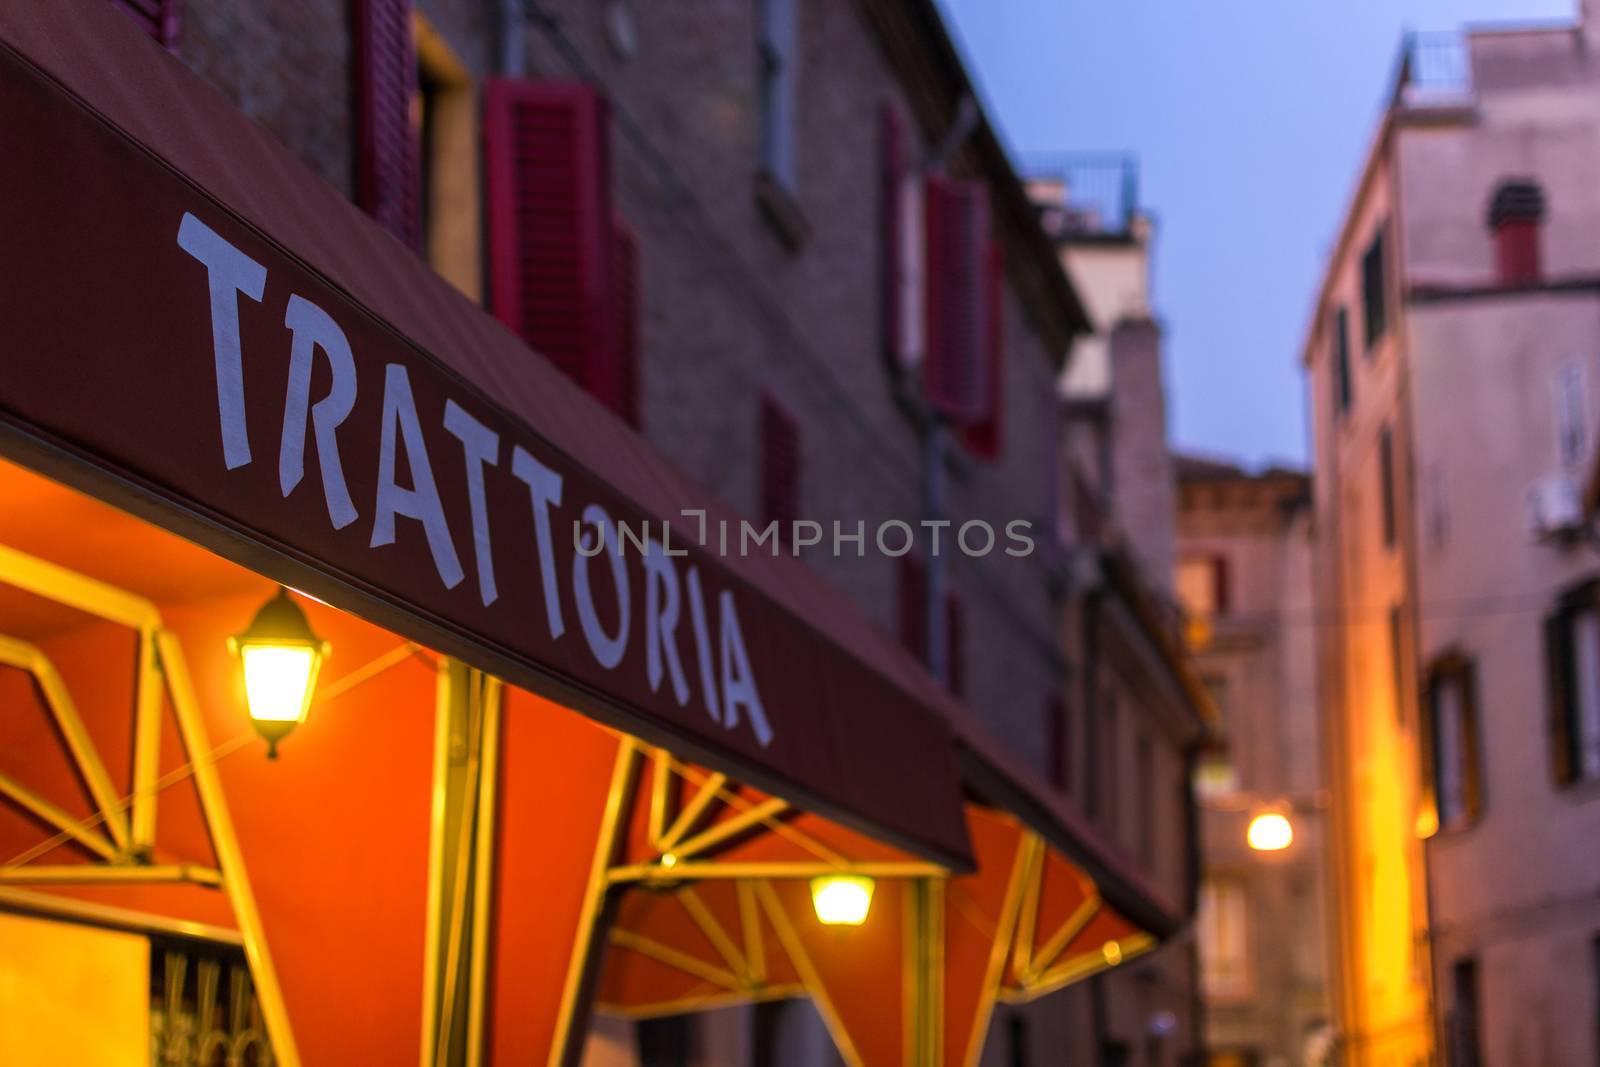 Old trattoria in the downtown of Ferrara city by enrico.lapponi